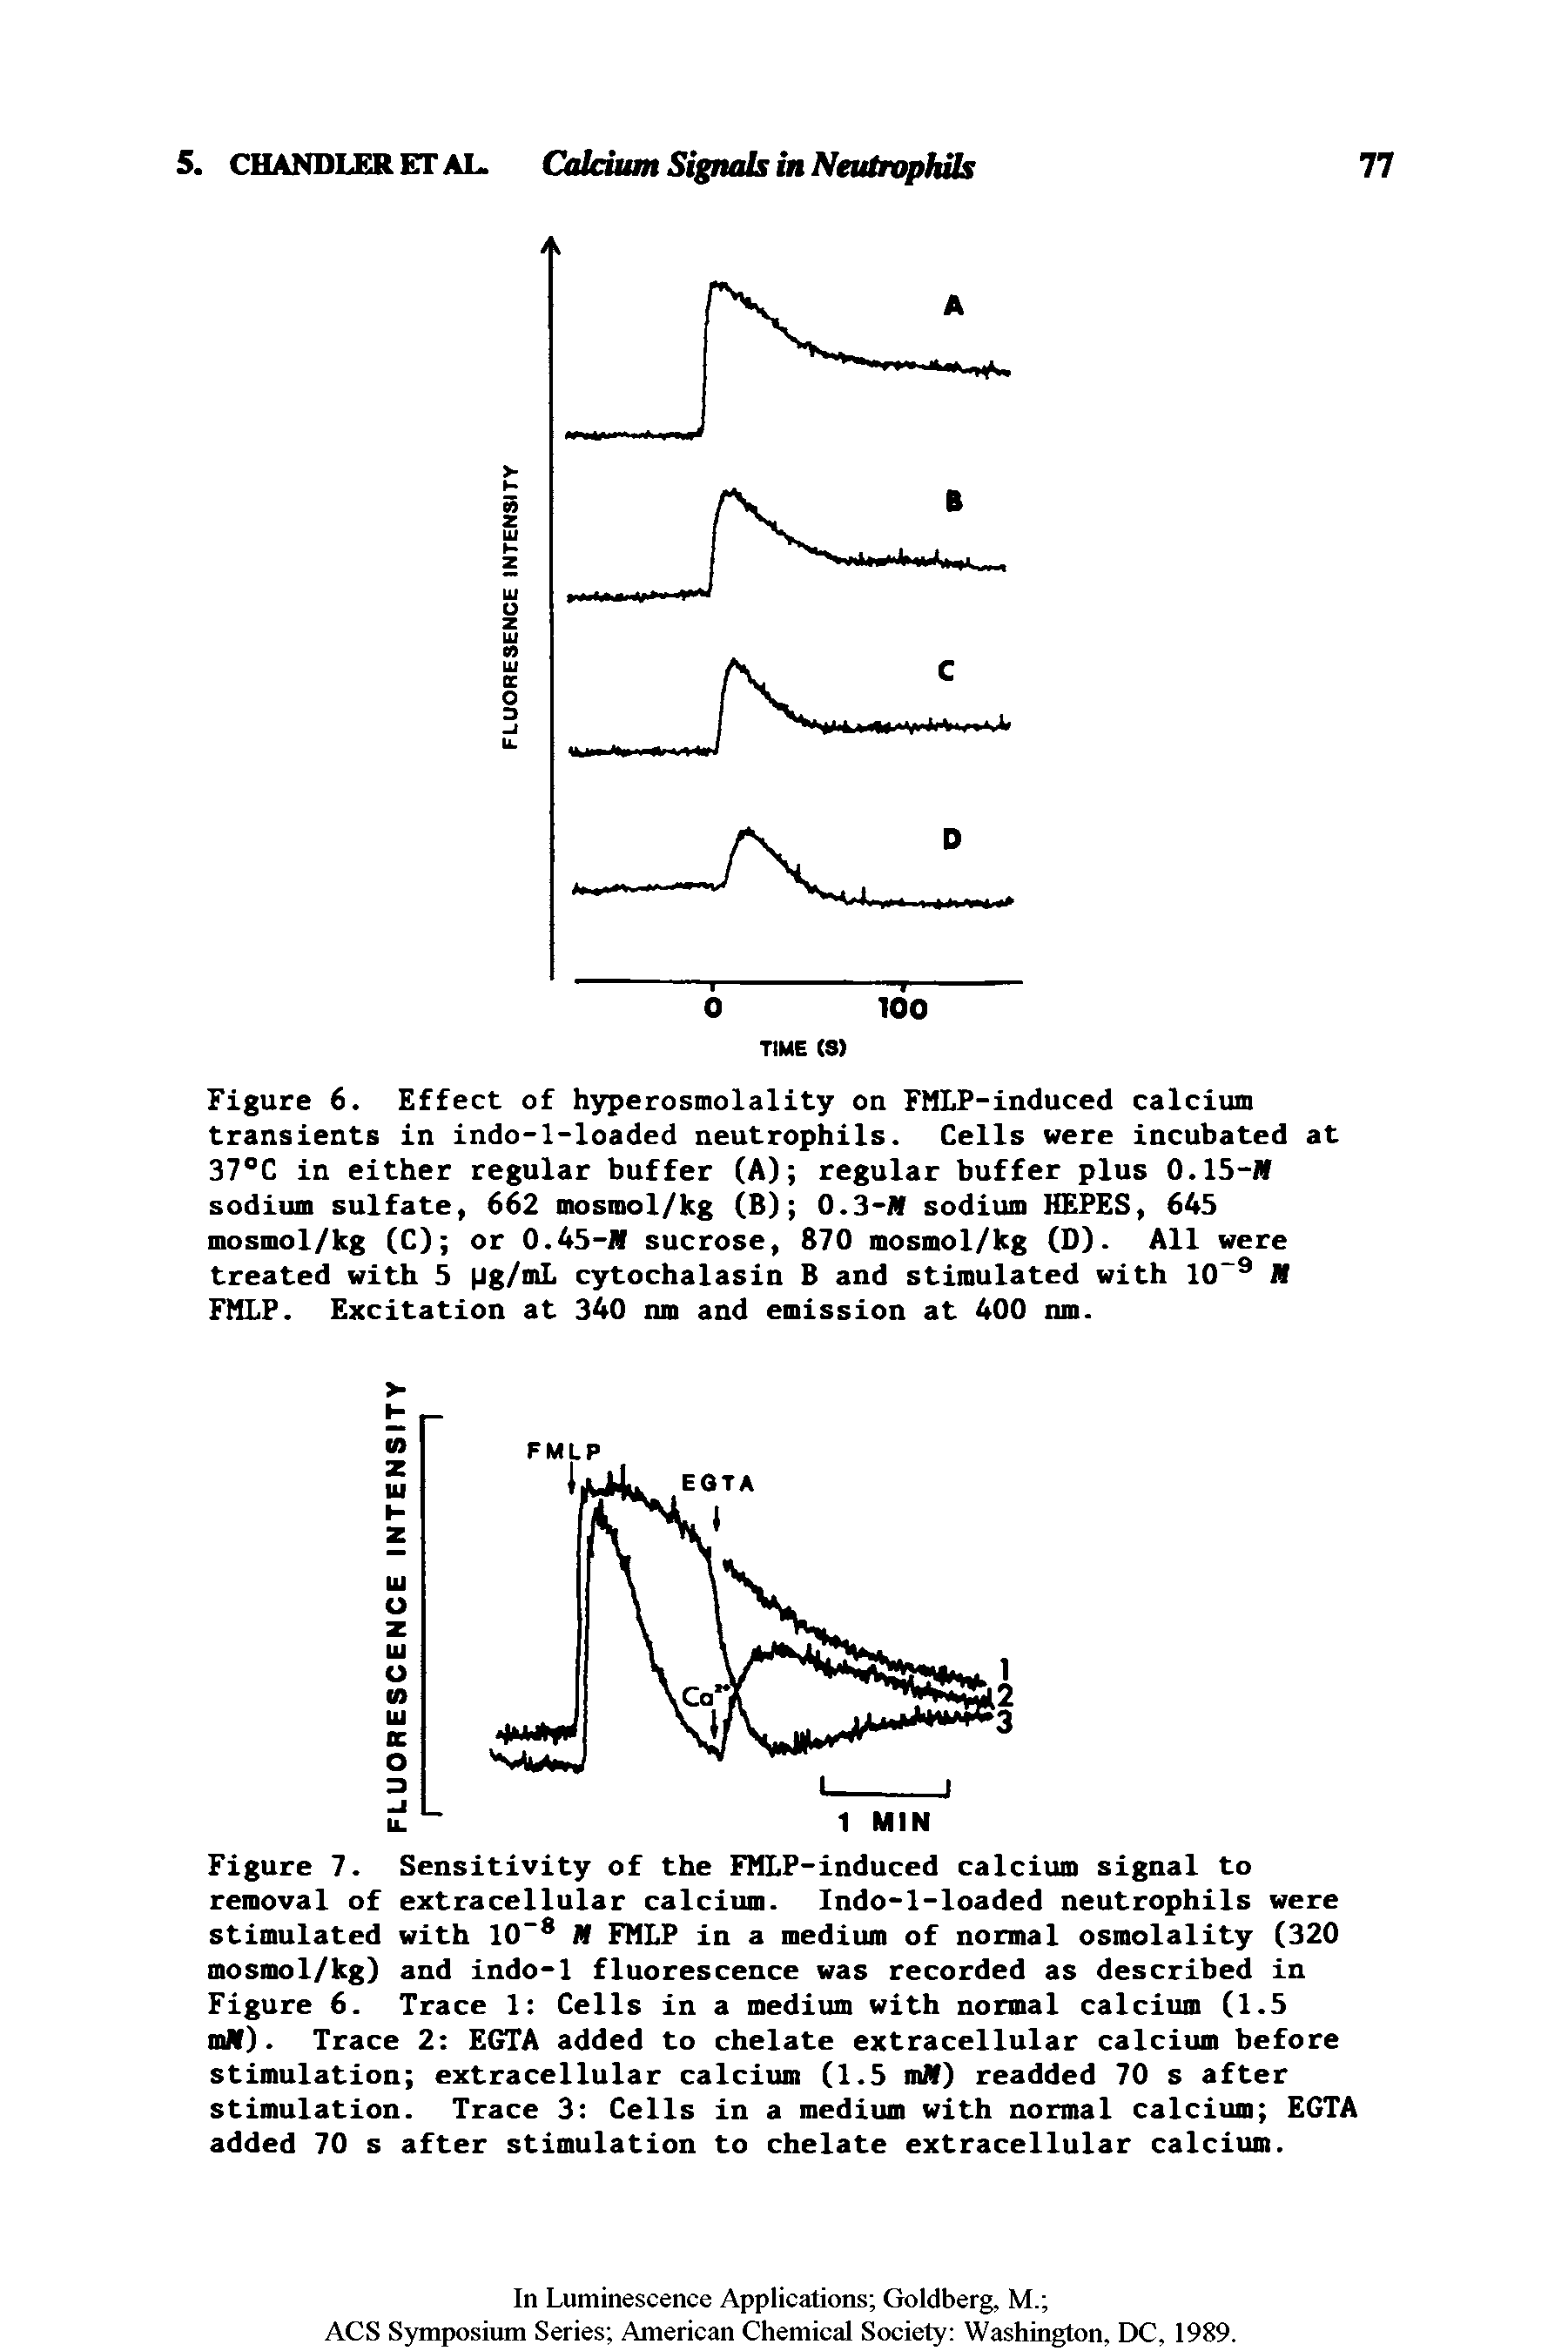 Figure 7. Sensitivity of the FMLP-induced calcium signal to removal of extracellular calcium. Indo-l-loaded neutrophils were stimulated with 10 M FMLP in a medium of normal osmolality (320 mosmol/kg) and indo-1 fluorescence was recorded as described in Figure 6. Trace 1 Cells in a medium with normal calcium (1.5 mN). Trace 2 EGTA added to chelate extracellular calcium before stimulation extracellular calcium (1.5 milf) readded 70 s after stimulation. Trace 3 Cells in a medium with normal calcium EGTA added 70 s after stimulation to chelate extracellular calcium.